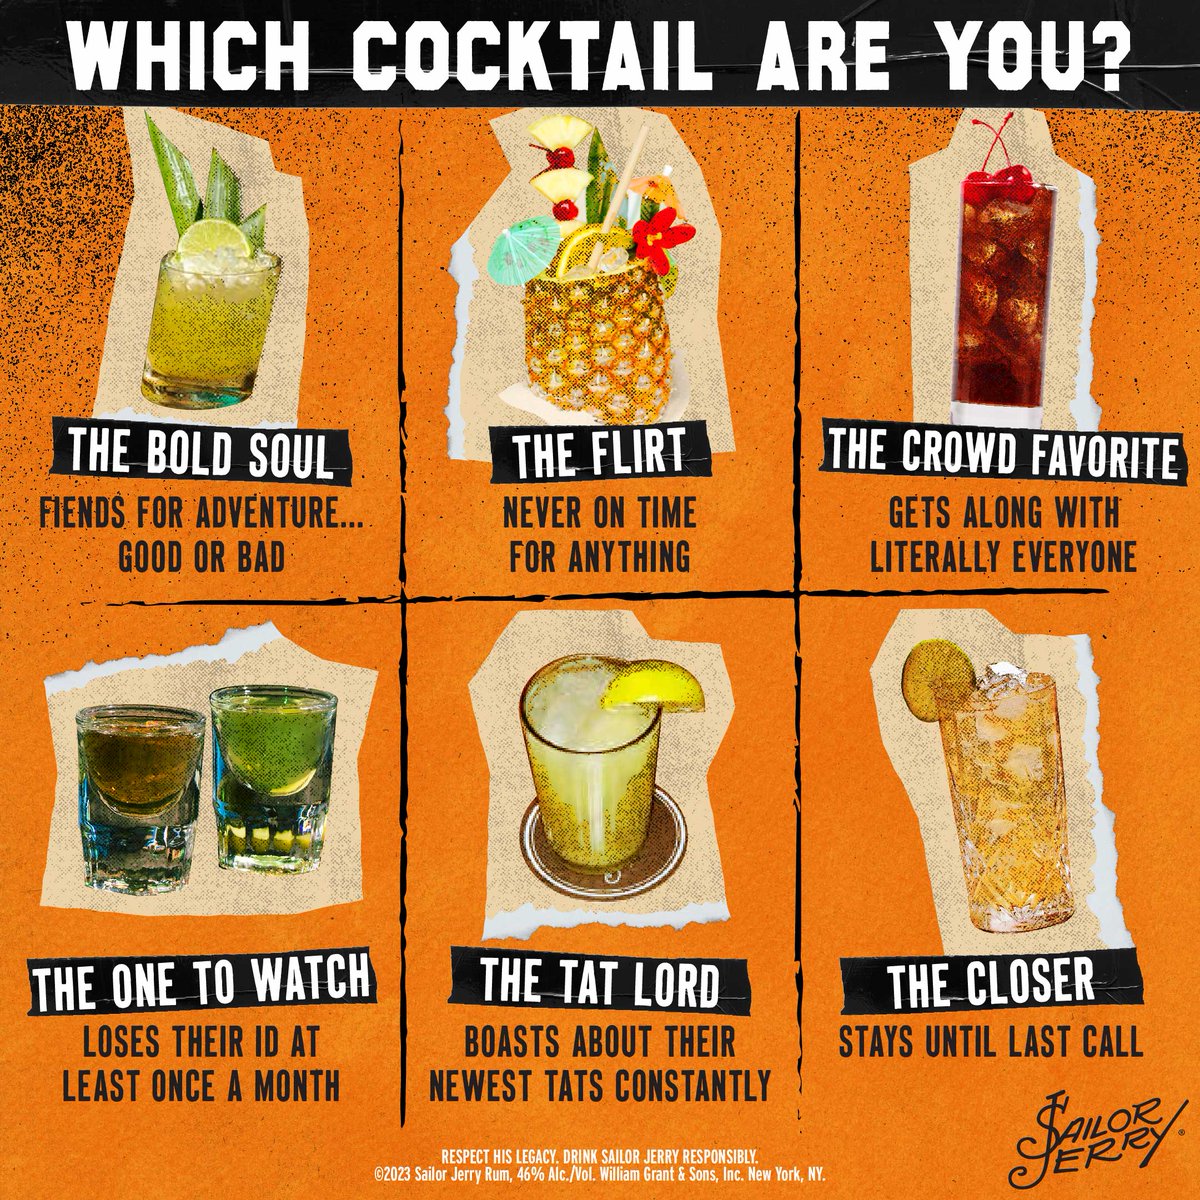 It's #NationalCocktailDay and we wanna know, which cocktail are you!? Drop a comment below ⬇️ #SailorJerry